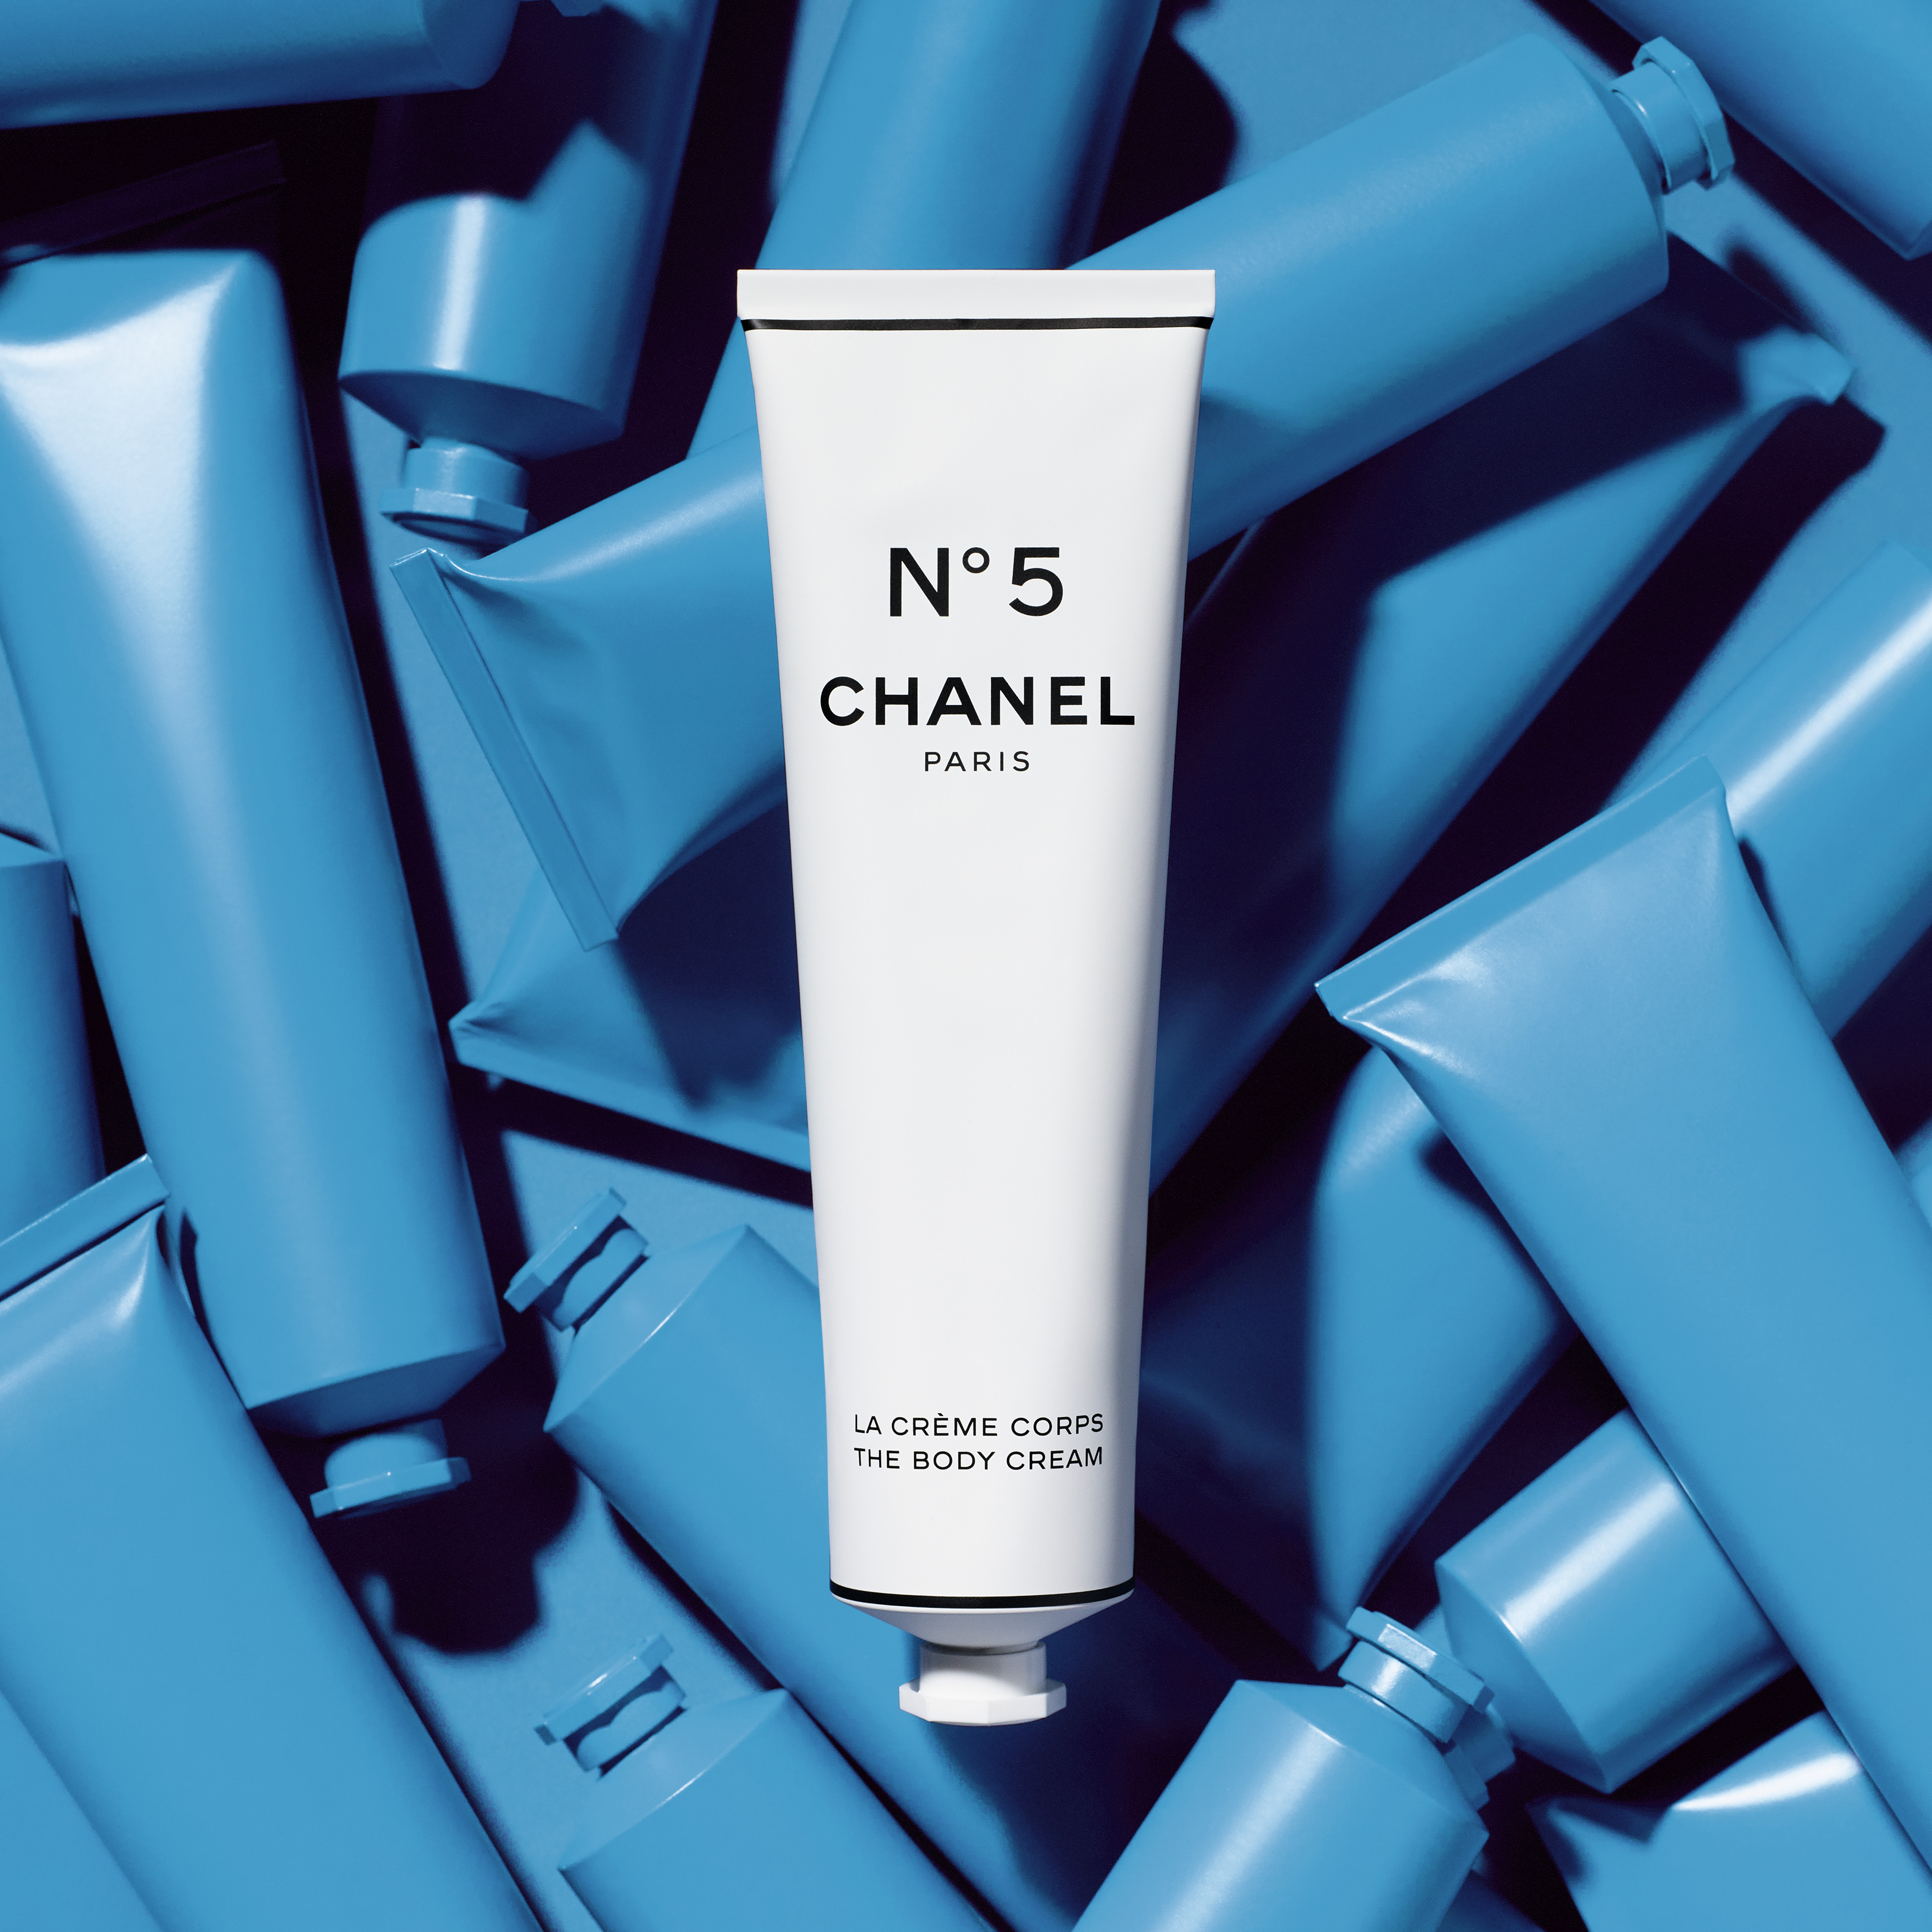 Chanel Factory 5 Le Gel Douche Shower Gel Beauty  Personal Care Bath   Body Body Care on Carousell